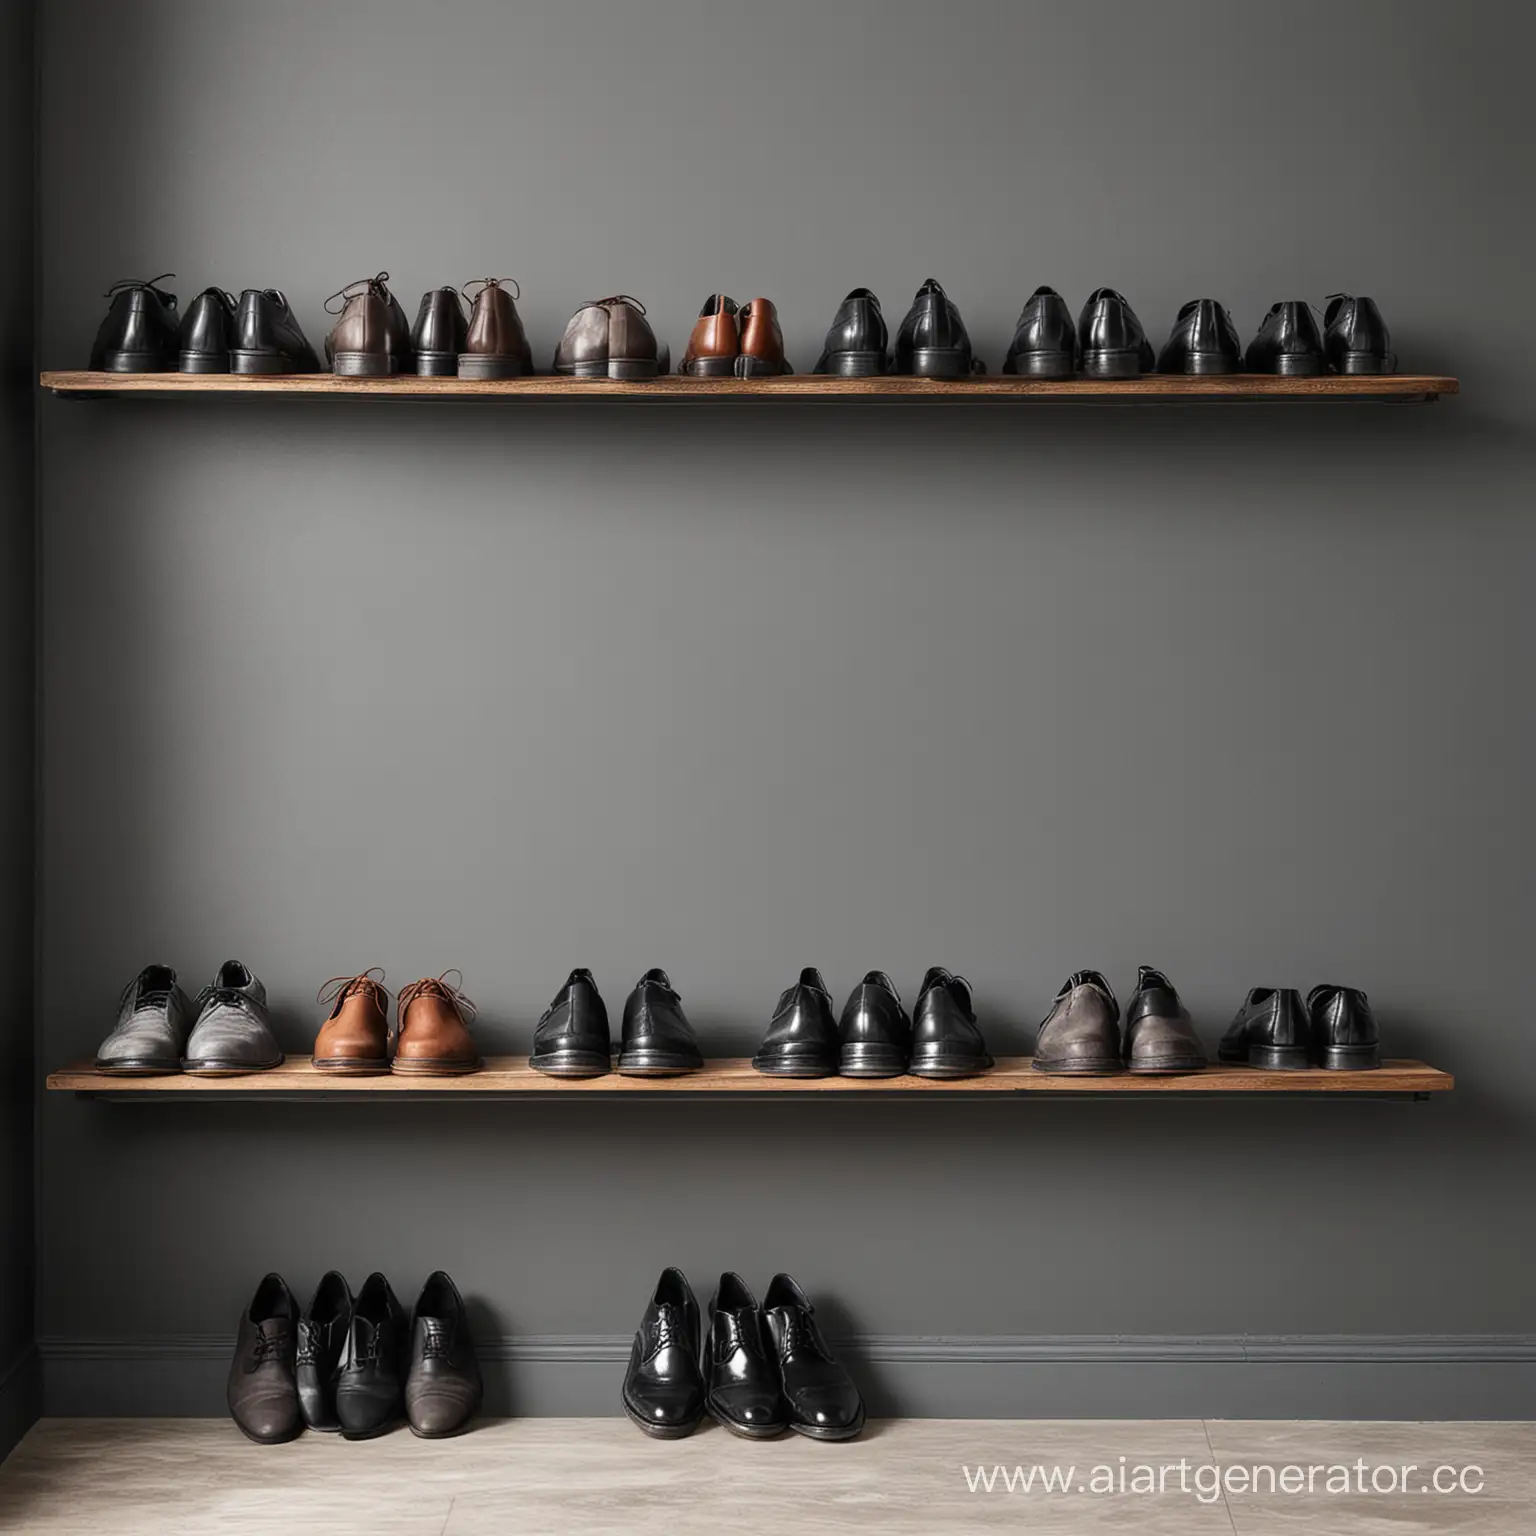 Mens-Leather-Shoes-Displayed-on-Gray-Wall-Shelves